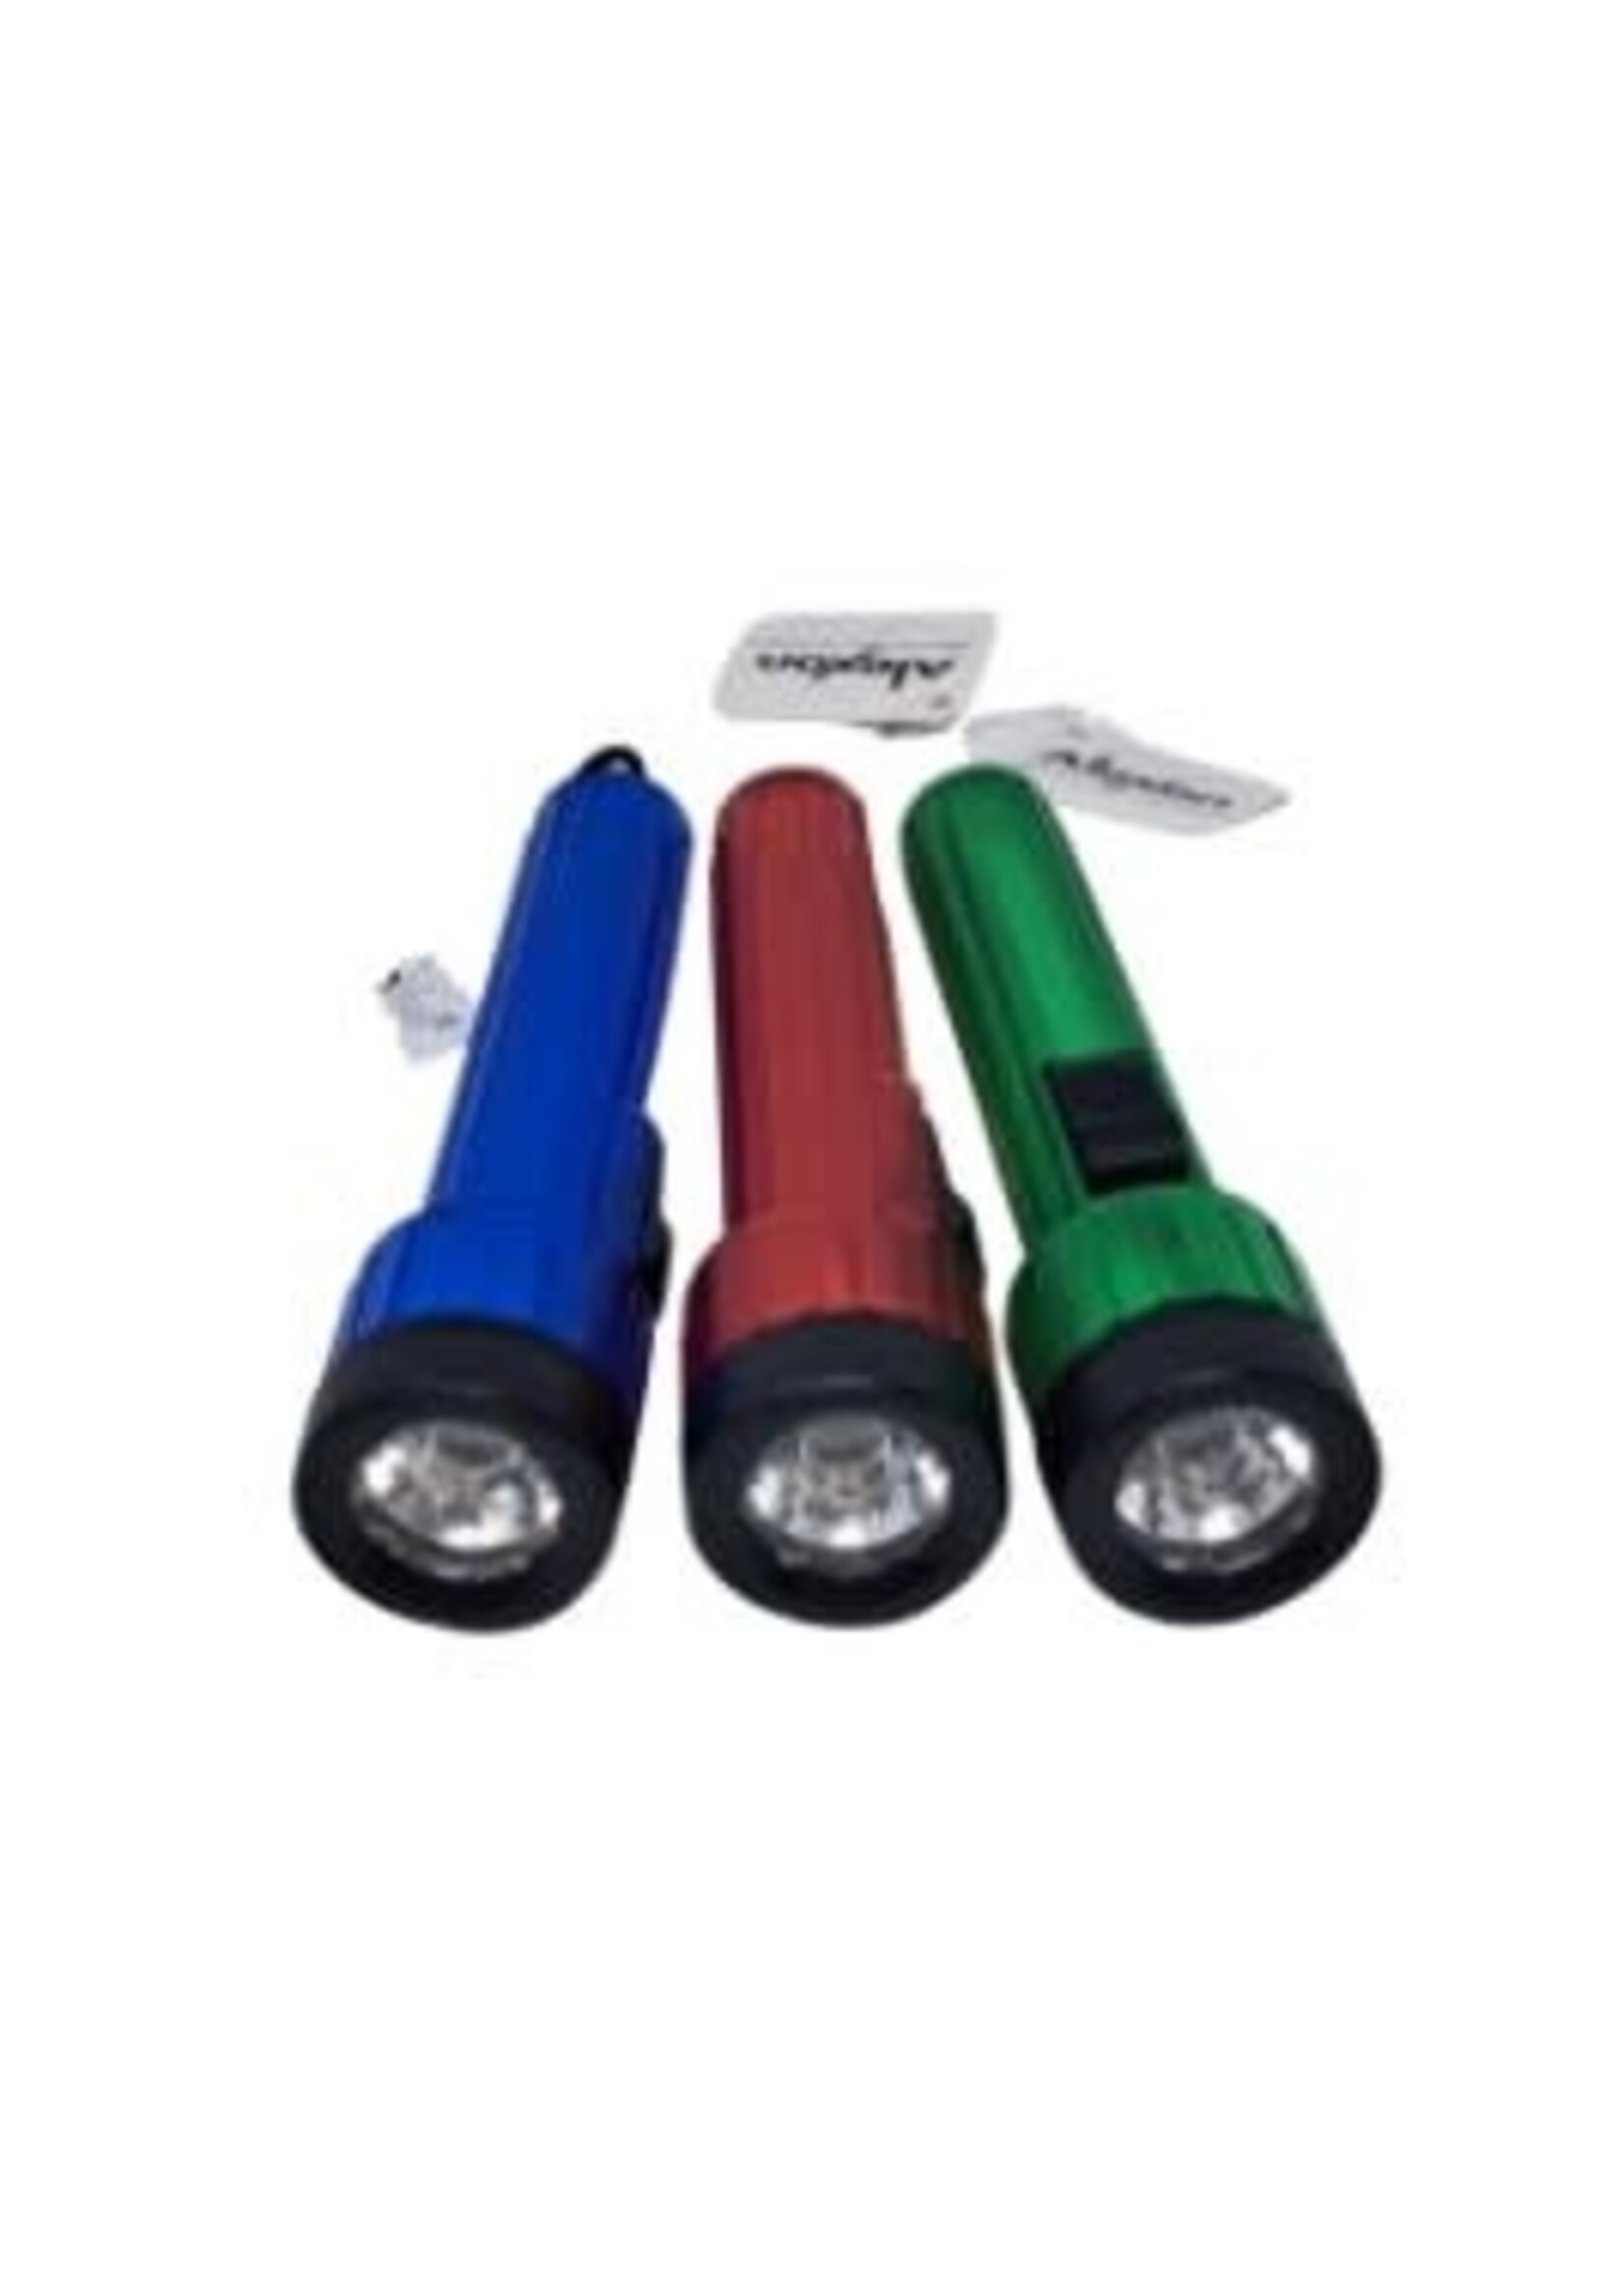 Flashlight - Assorted Colors w/ batteries